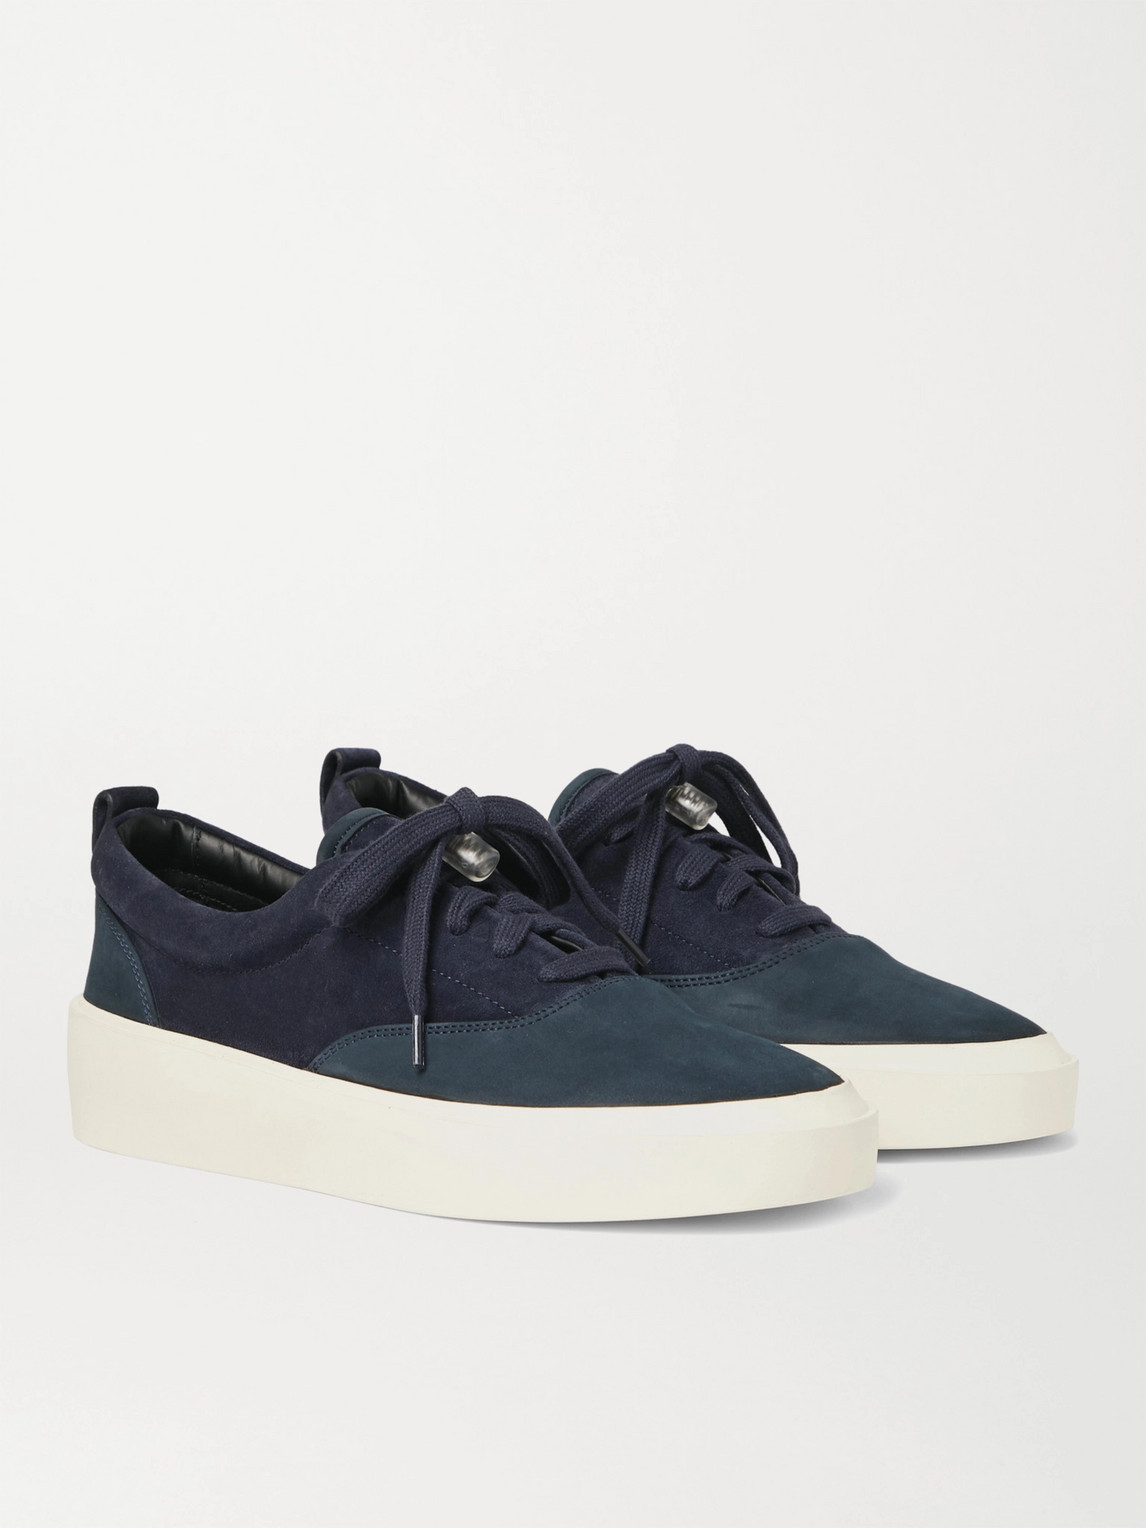 FEAR OF GOD 101 SUEDE AND NUBUCK SNEAKERS